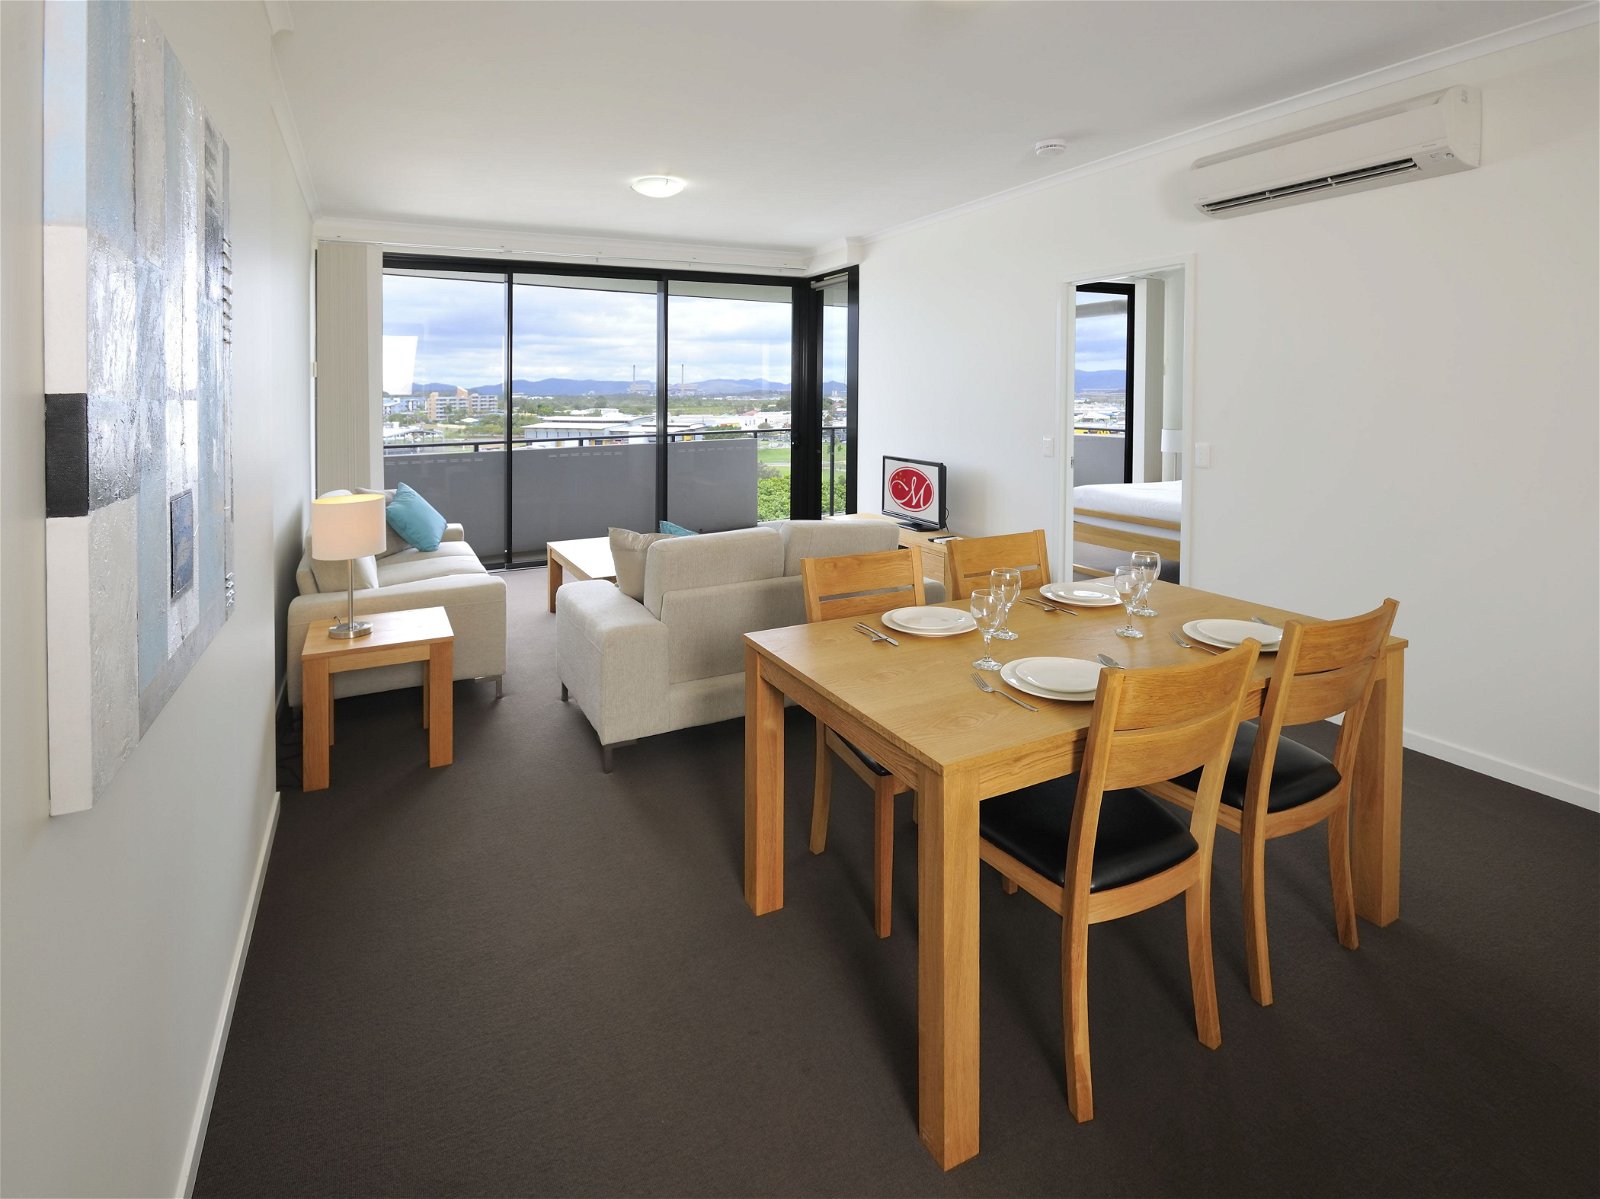 Apartments G60 Gladstone managed by Metro Hotels